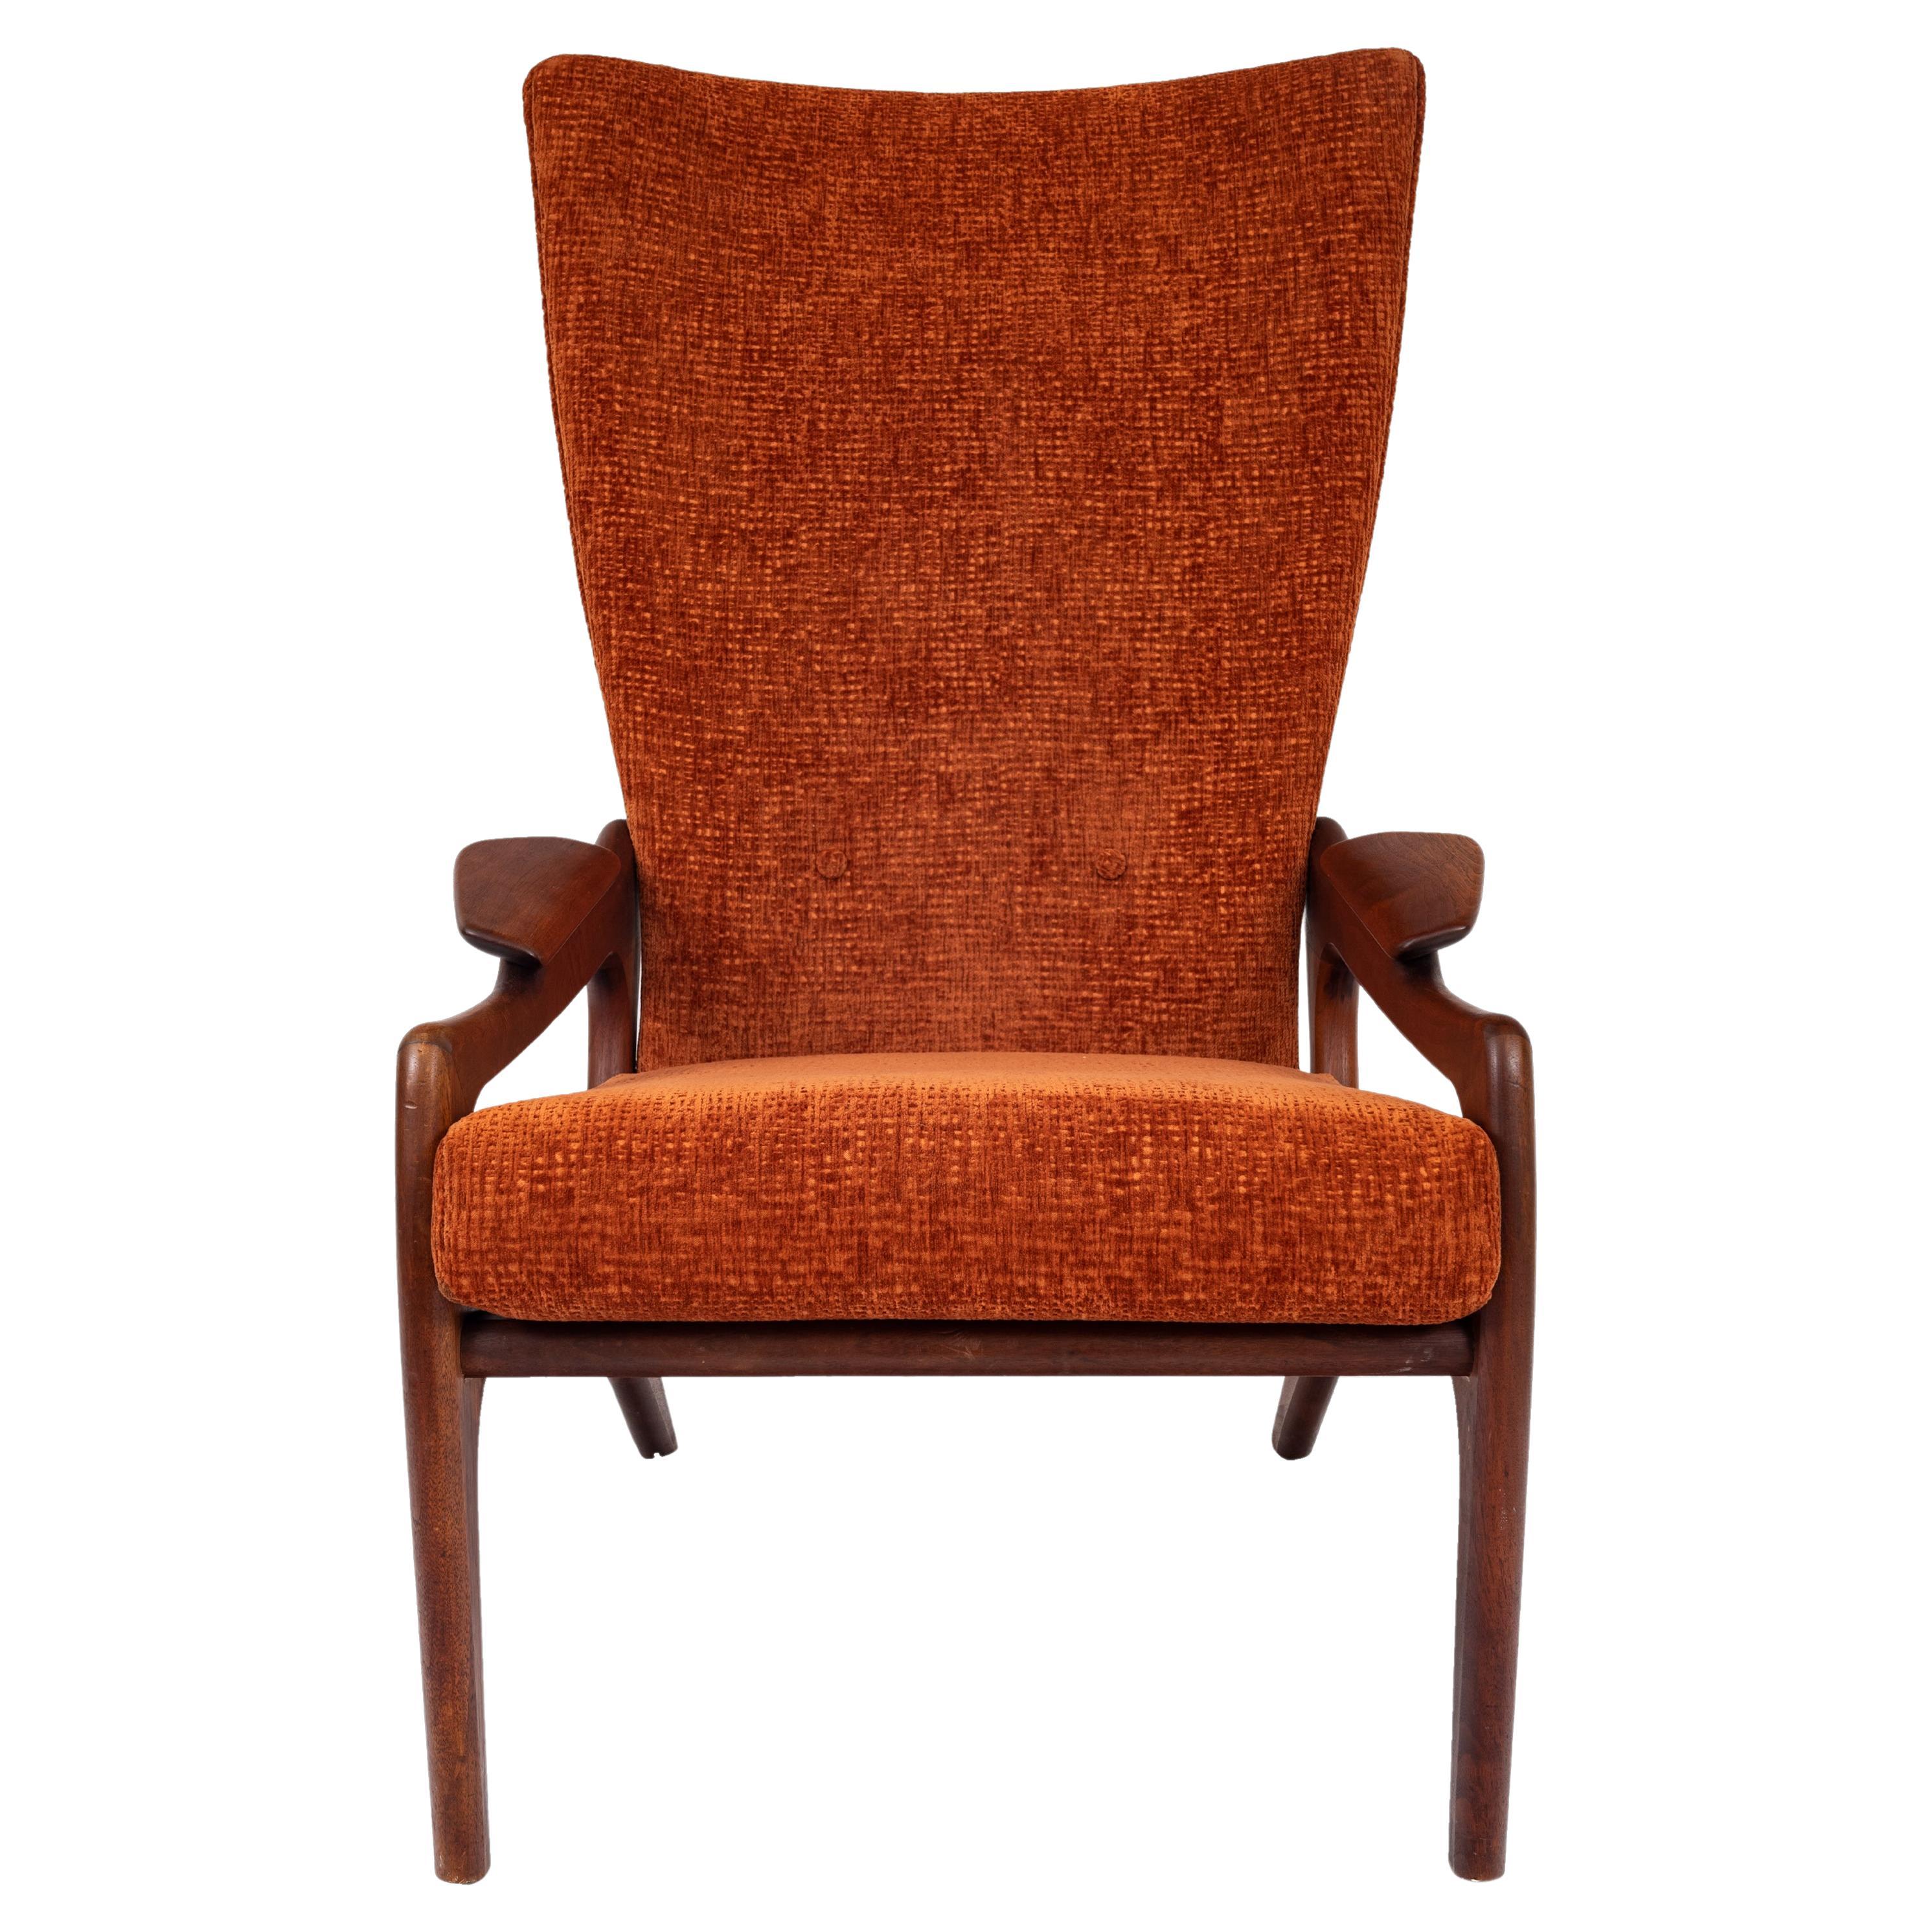 A good Adrian Pearsall Mid-Century Modern for Craft Associates highback lounge chair, 1960's.
The chair having a highback and walnut frame with a cutout design to the sides and raised armrests, the chair has just been professionally re-upholstered